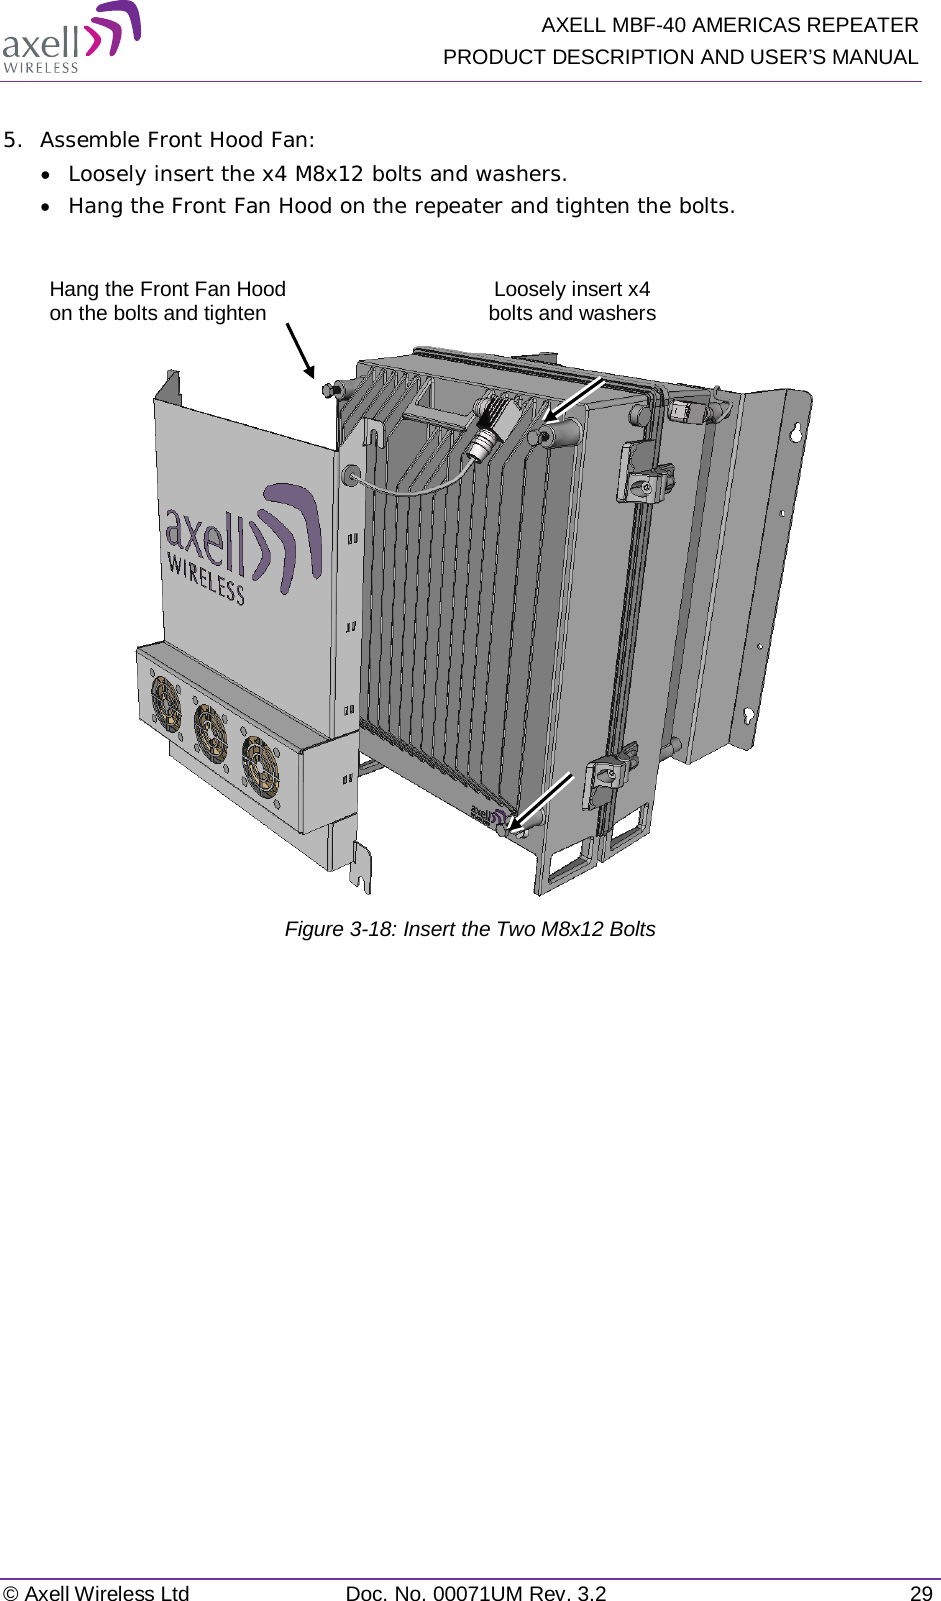   AXELL MBF-40 AMERICAS REPEATER PRODUCT DESCRIPTION AND USER’S MANUAL © Axell Wireless Ltd Doc. No. 00071UM Rev. 3.2 29  5.  Assemble Front Hood Fan: • Loosely insert the x4 M8x12 bolts and washers.  • Hang the Front Fan Hood on the repeater and tighten the bolts.    Figure  3-18: Insert the Two M8x12 Bolts   Loosely insert x4 bolts and washers Hang the Front Fan Hood on the bolts and tighten 